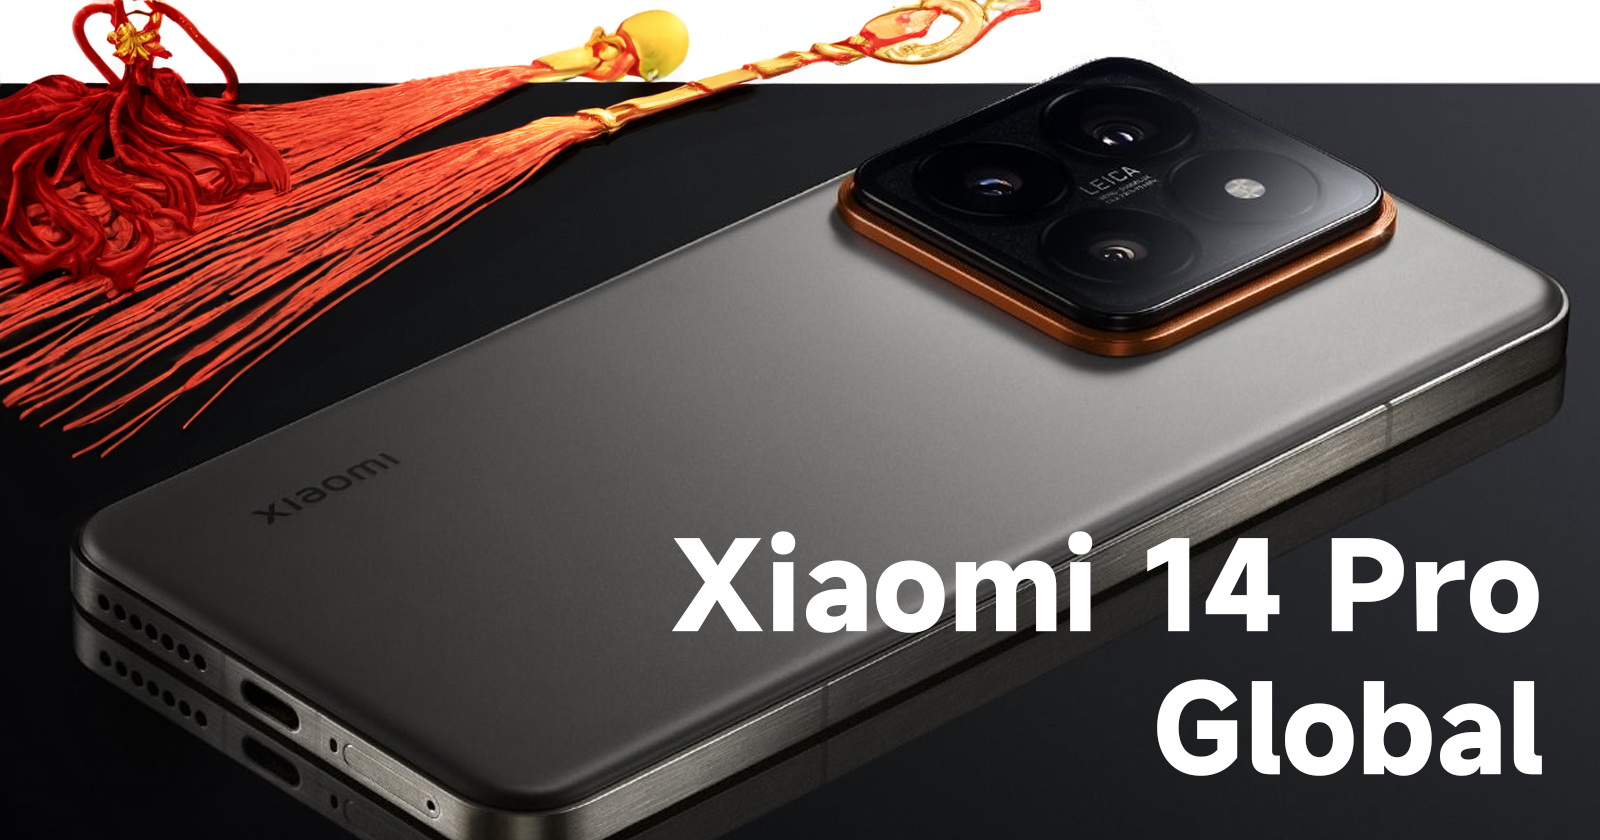 Xiaomi 14 Pro may not ever officially launch outside of China